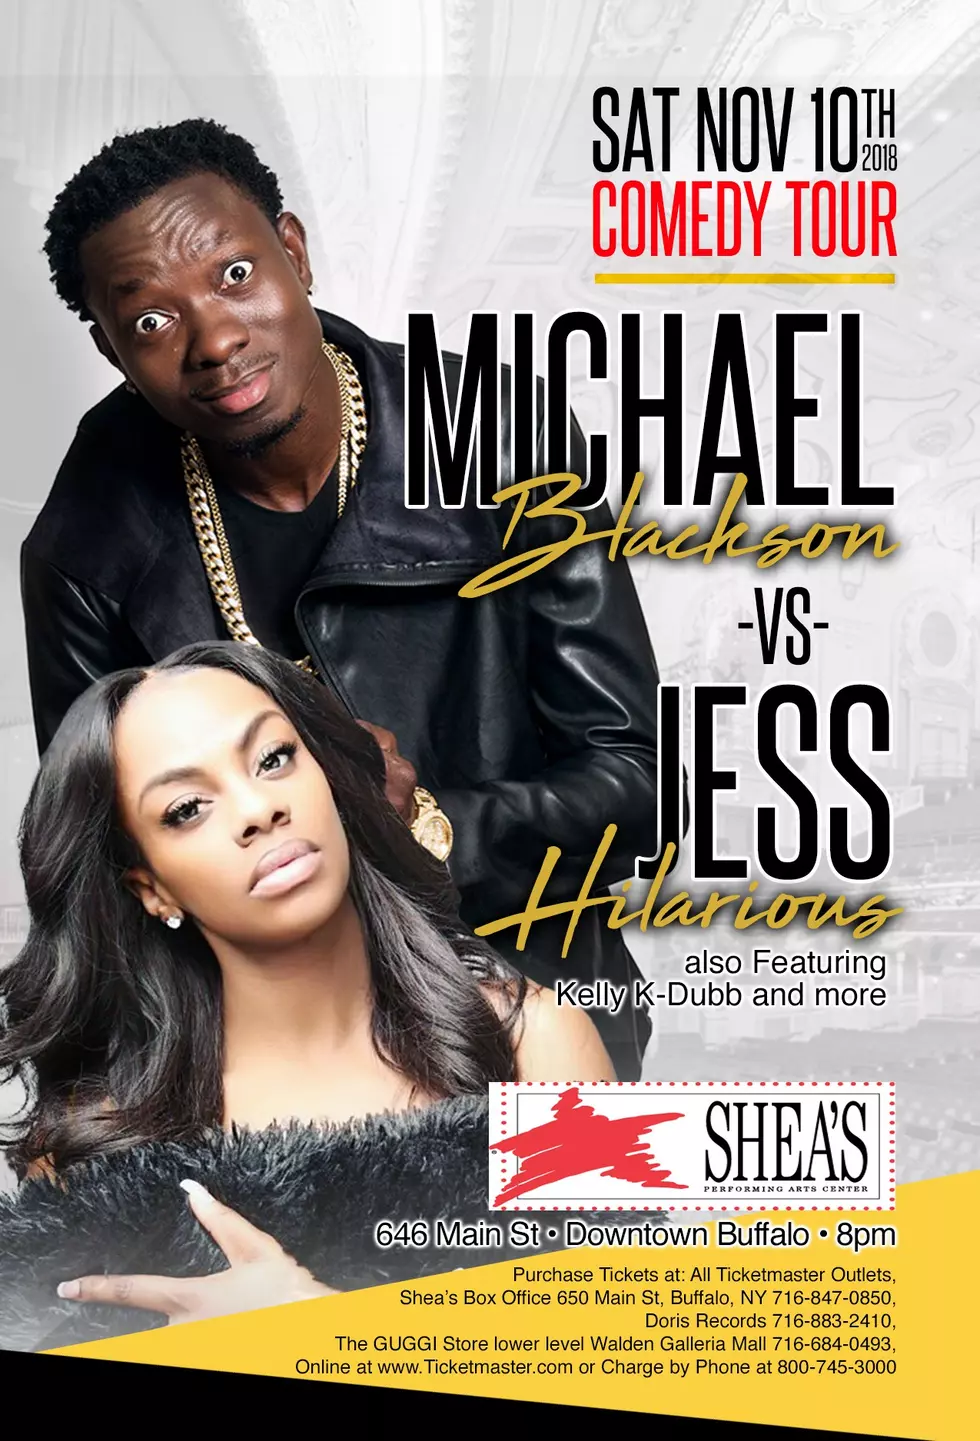 Micheal Blackson is coming to Shea's with Jess Hilarious